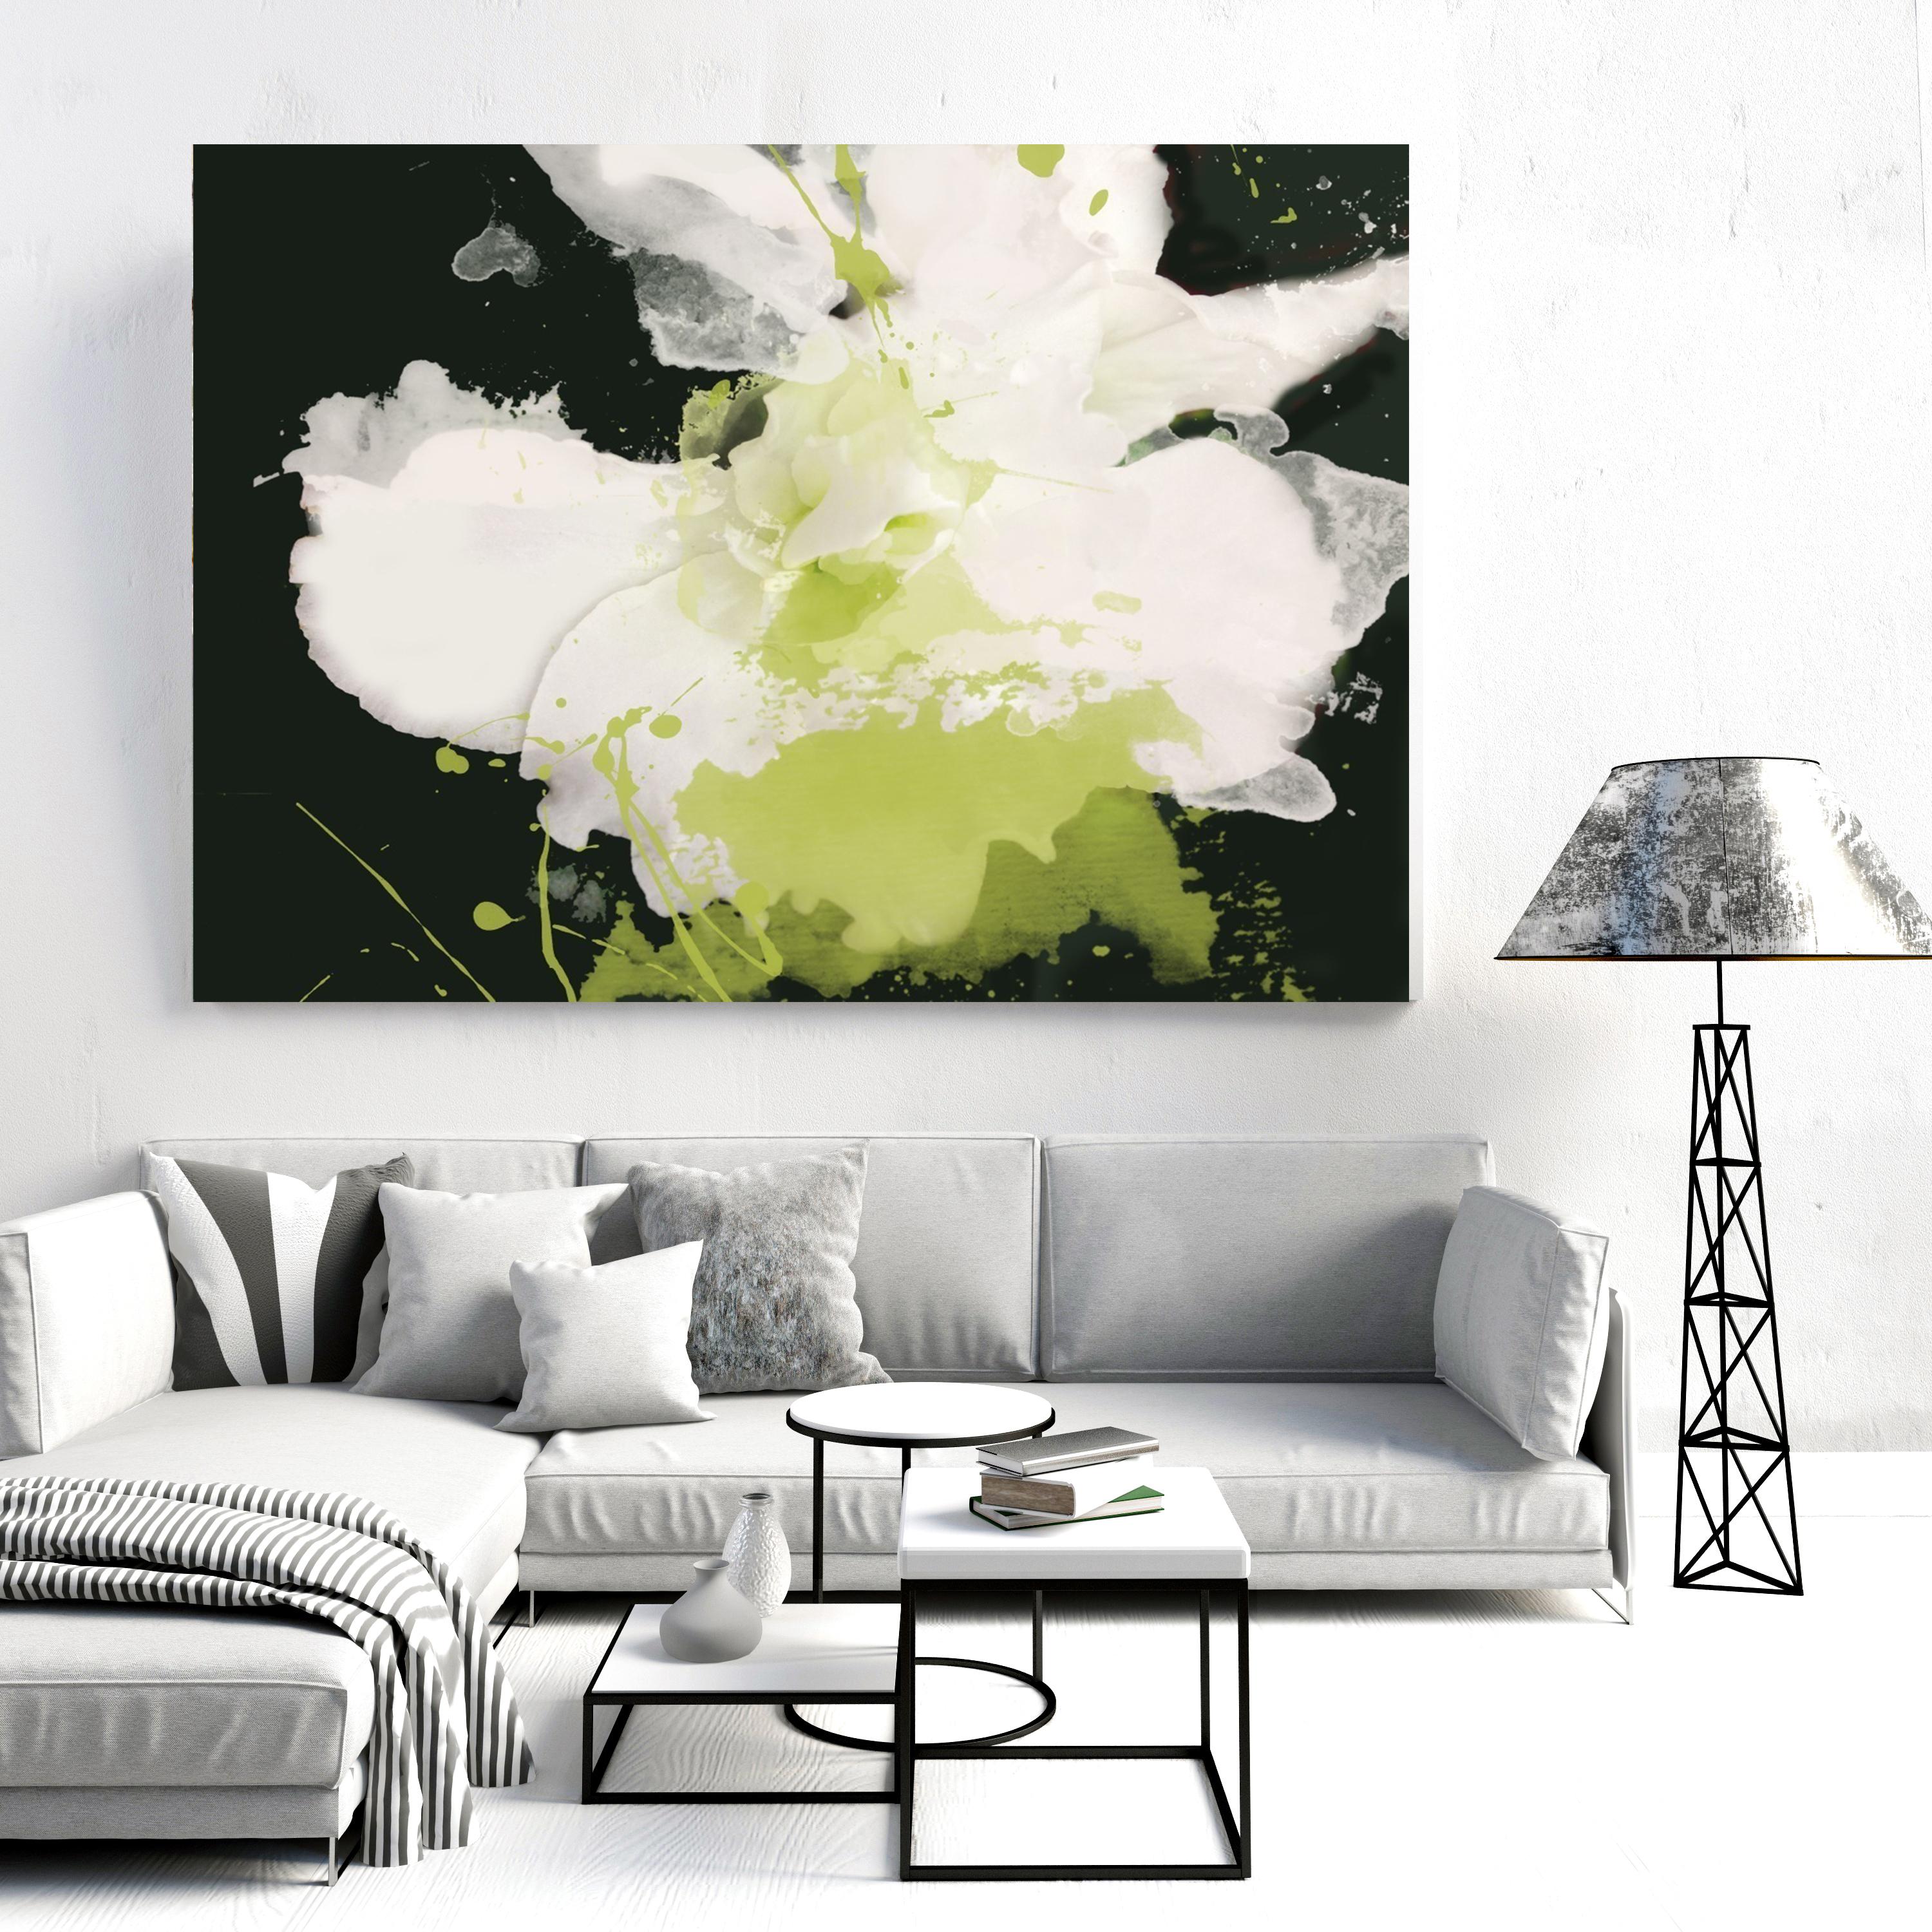 Serene Green Floral Painting Hand Embellished Giclee on Canvas 40H X 60W 

State-of-the-art HAND EMBELLISHED ∽ MUSEUM QUALITY ∽ DISPLAY READY Giclee Reproduction
Each limited edition Giclee is hand embellished by the artist, making it one of a kind